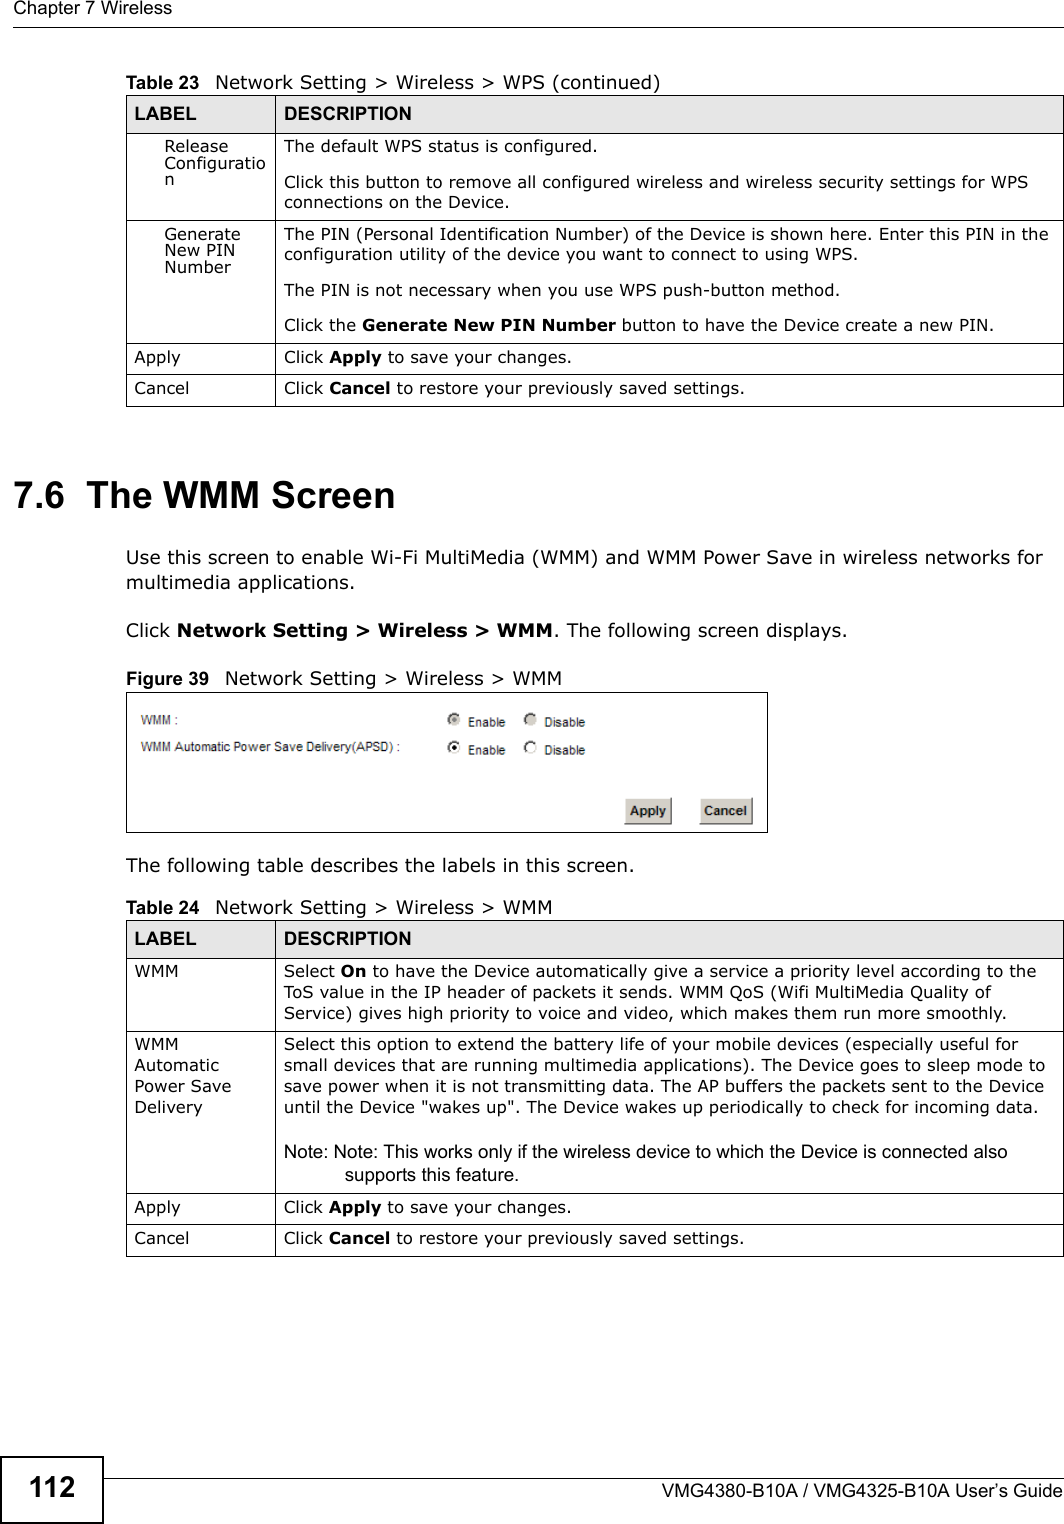 Chapter 7 WirelessVMG4380-B10A / VMG4325-B10A User’s Guide1127.6  The WMM ScreenUse this screen to enable Wi-Fi MultiMedia (WMM) and WMM Power Save in wireless networks for multimedia applications.Click Network Setting &gt; Wireless &gt; WMM. The following screen displays.Figure 39   Network Setting &gt; Wireless &gt; WMMThe following table describes the labels in this screen.ReleaseConfigurationThe default WPS status is configured.Click this button to remove all configured wireless and wireless security settings for WPS connections on the Device.GenerateNew PINNumberThe PIN (Personal Identification Number) of the Device is shown here. Enter this PIN in the configuration utility of the device you want to connect to using WPS.The PIN is not necessary when you use WPS push-button method.Click the Generate New PIN Number button to have the Device create a new PIN.Apply Click Apply to save your changes.Cancel Click Cancel to restore your previously saved settings.Table 23   Network Setting &gt; Wireless &gt; WPS (continued)LABEL DESCRIPTIONTable 24   Network Setting &gt; Wireless &gt; WMMLABEL DESCRIPTIONWMM Select On to have the Device automatically give a service a priority level according to the ToS value in the IP header of packets it sends. WMM QoS (Wifi MultiMedia Quality of Service) gives high priority to voice and video, which makes them run more smoothly.WMM AutomaticPower SaveDeliverySelect this option to extend the battery life of your mobile devices (especially useful for small devices that are running multimedia applications). The Device goes to sleep mode tosave power when it is not transmitting data. The AP buffers the packets sent to the Device until the Device &quot;wakes up&quot;. The Device wakes up periodically to check for incoming data.Note: Note: This works only if the wireless device to which the Device is connected also supports this feature.Apply Click Apply to save your changes.Cancel Click Cancel to restore your previously saved settings.